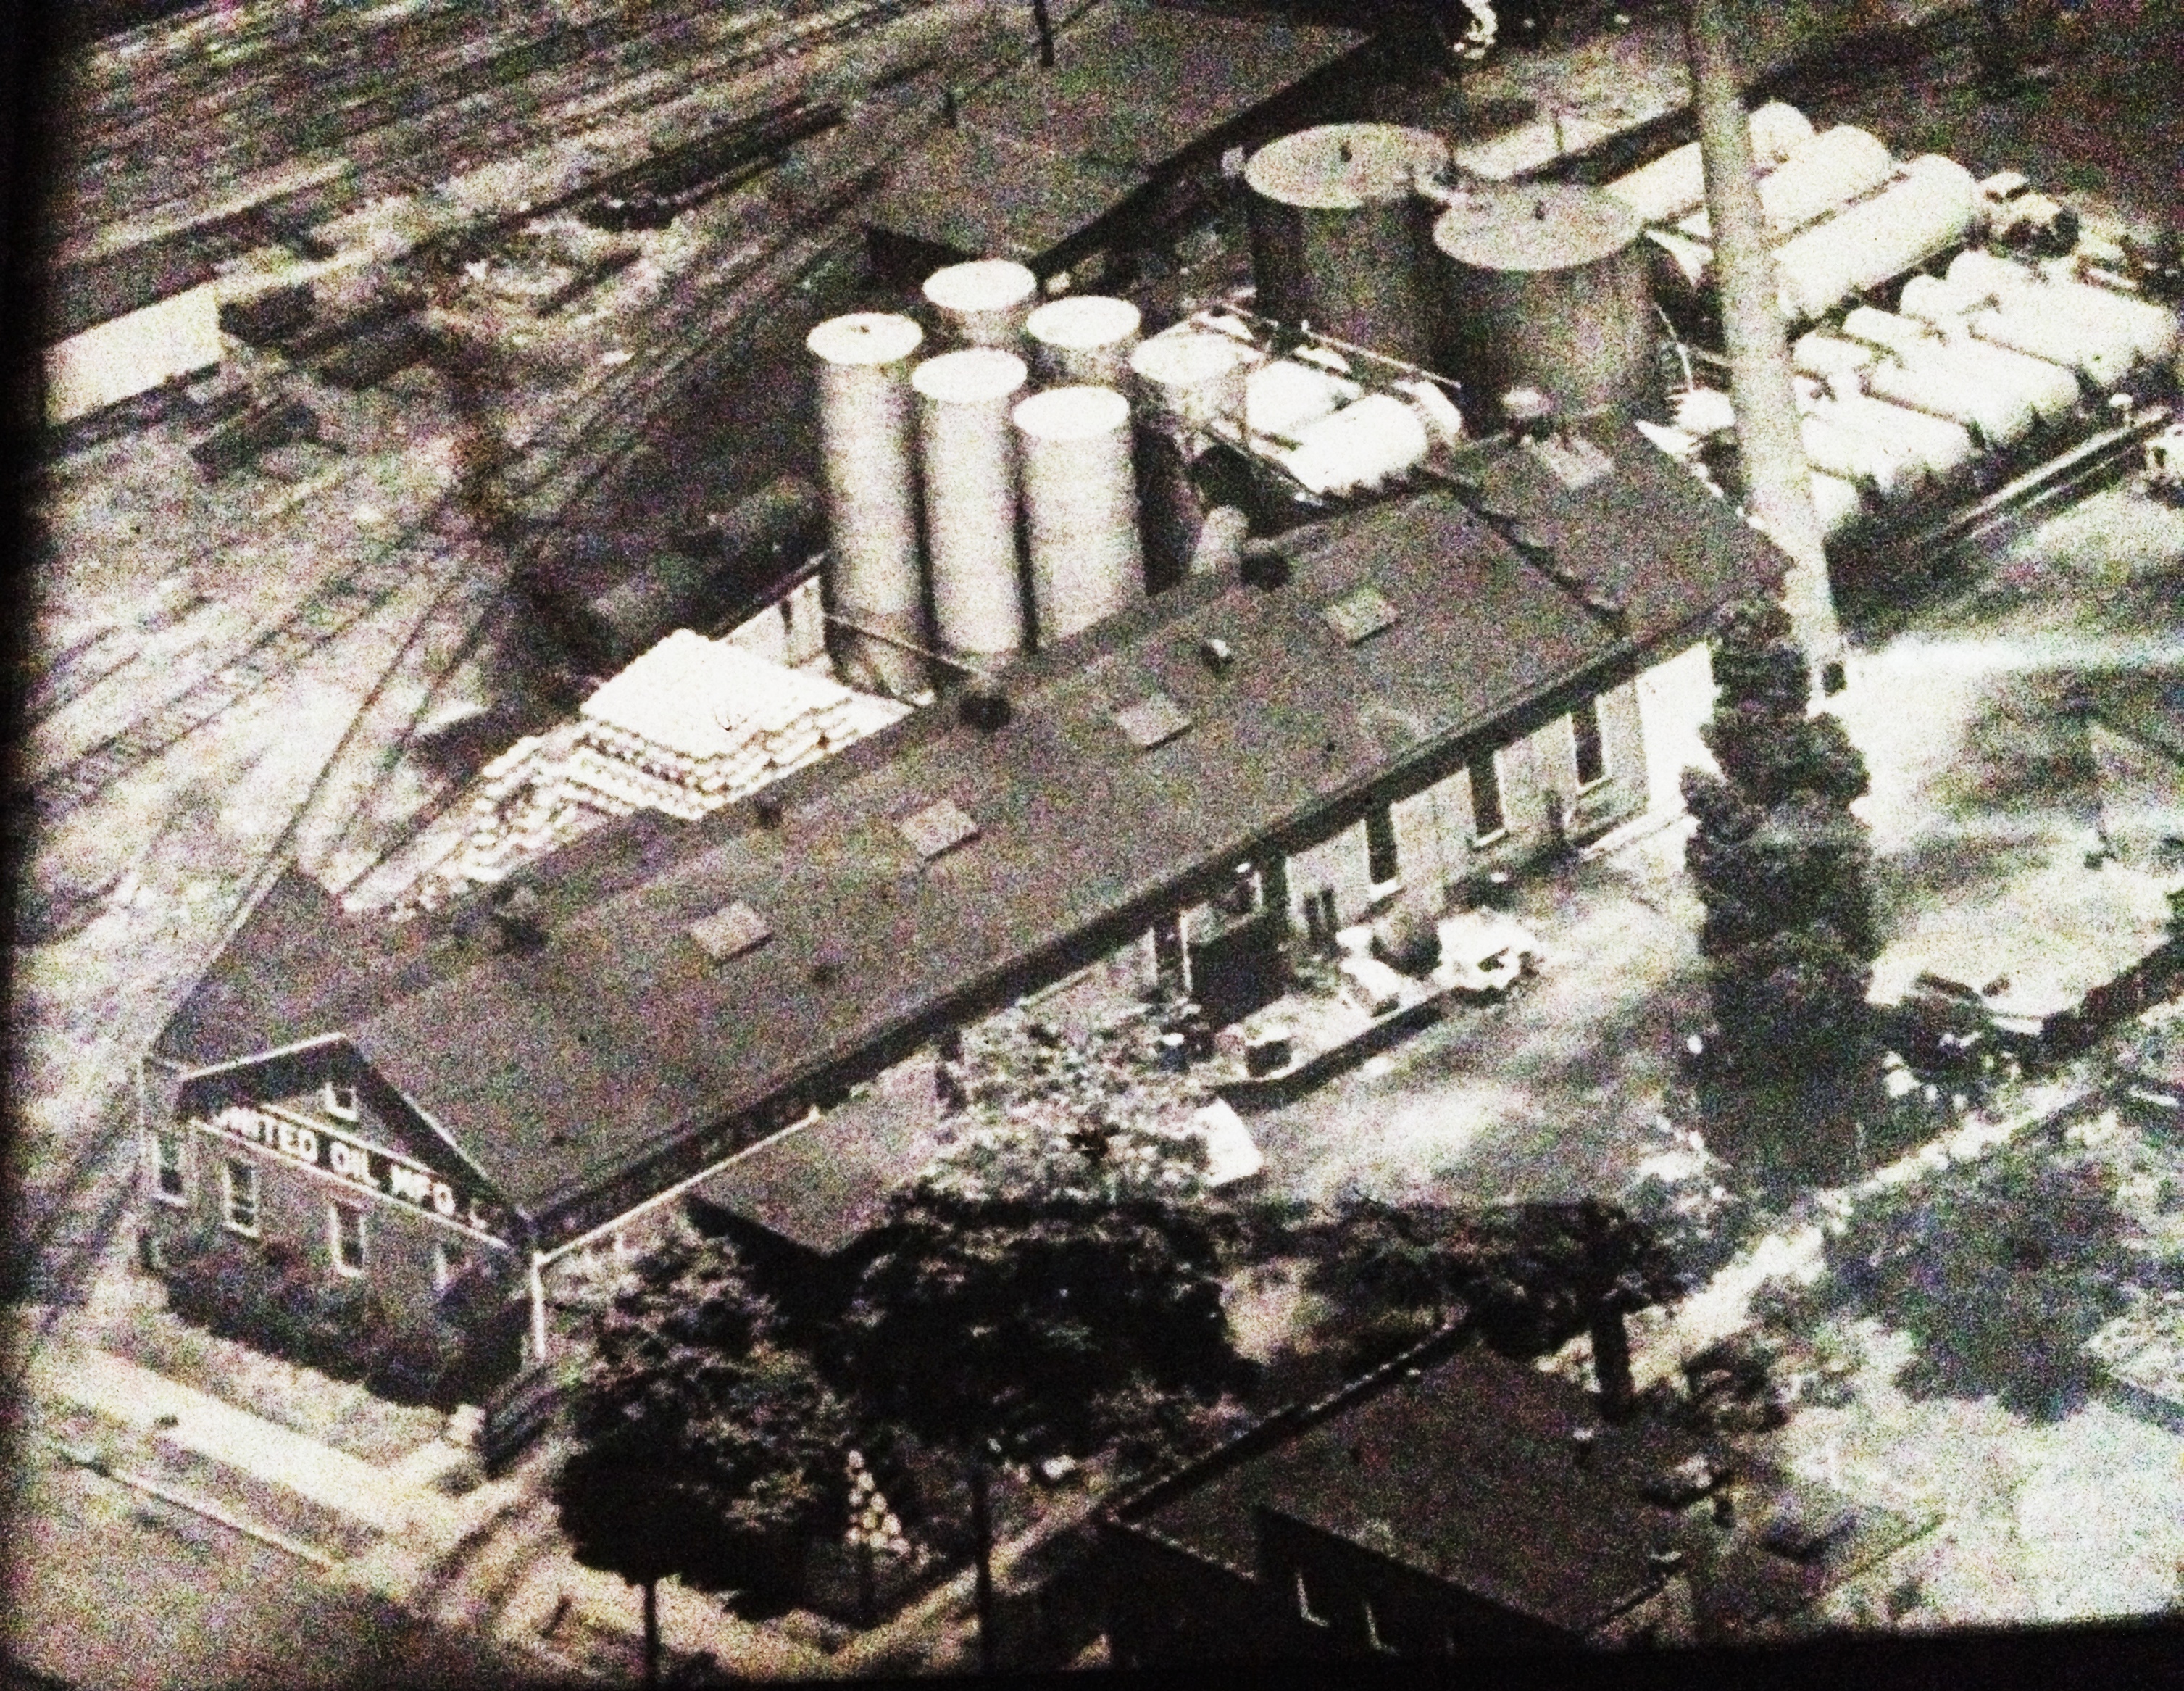 United Erie located at 1432 Chestnut Street in Erie, PA circa 1947 as seen from aerial view.